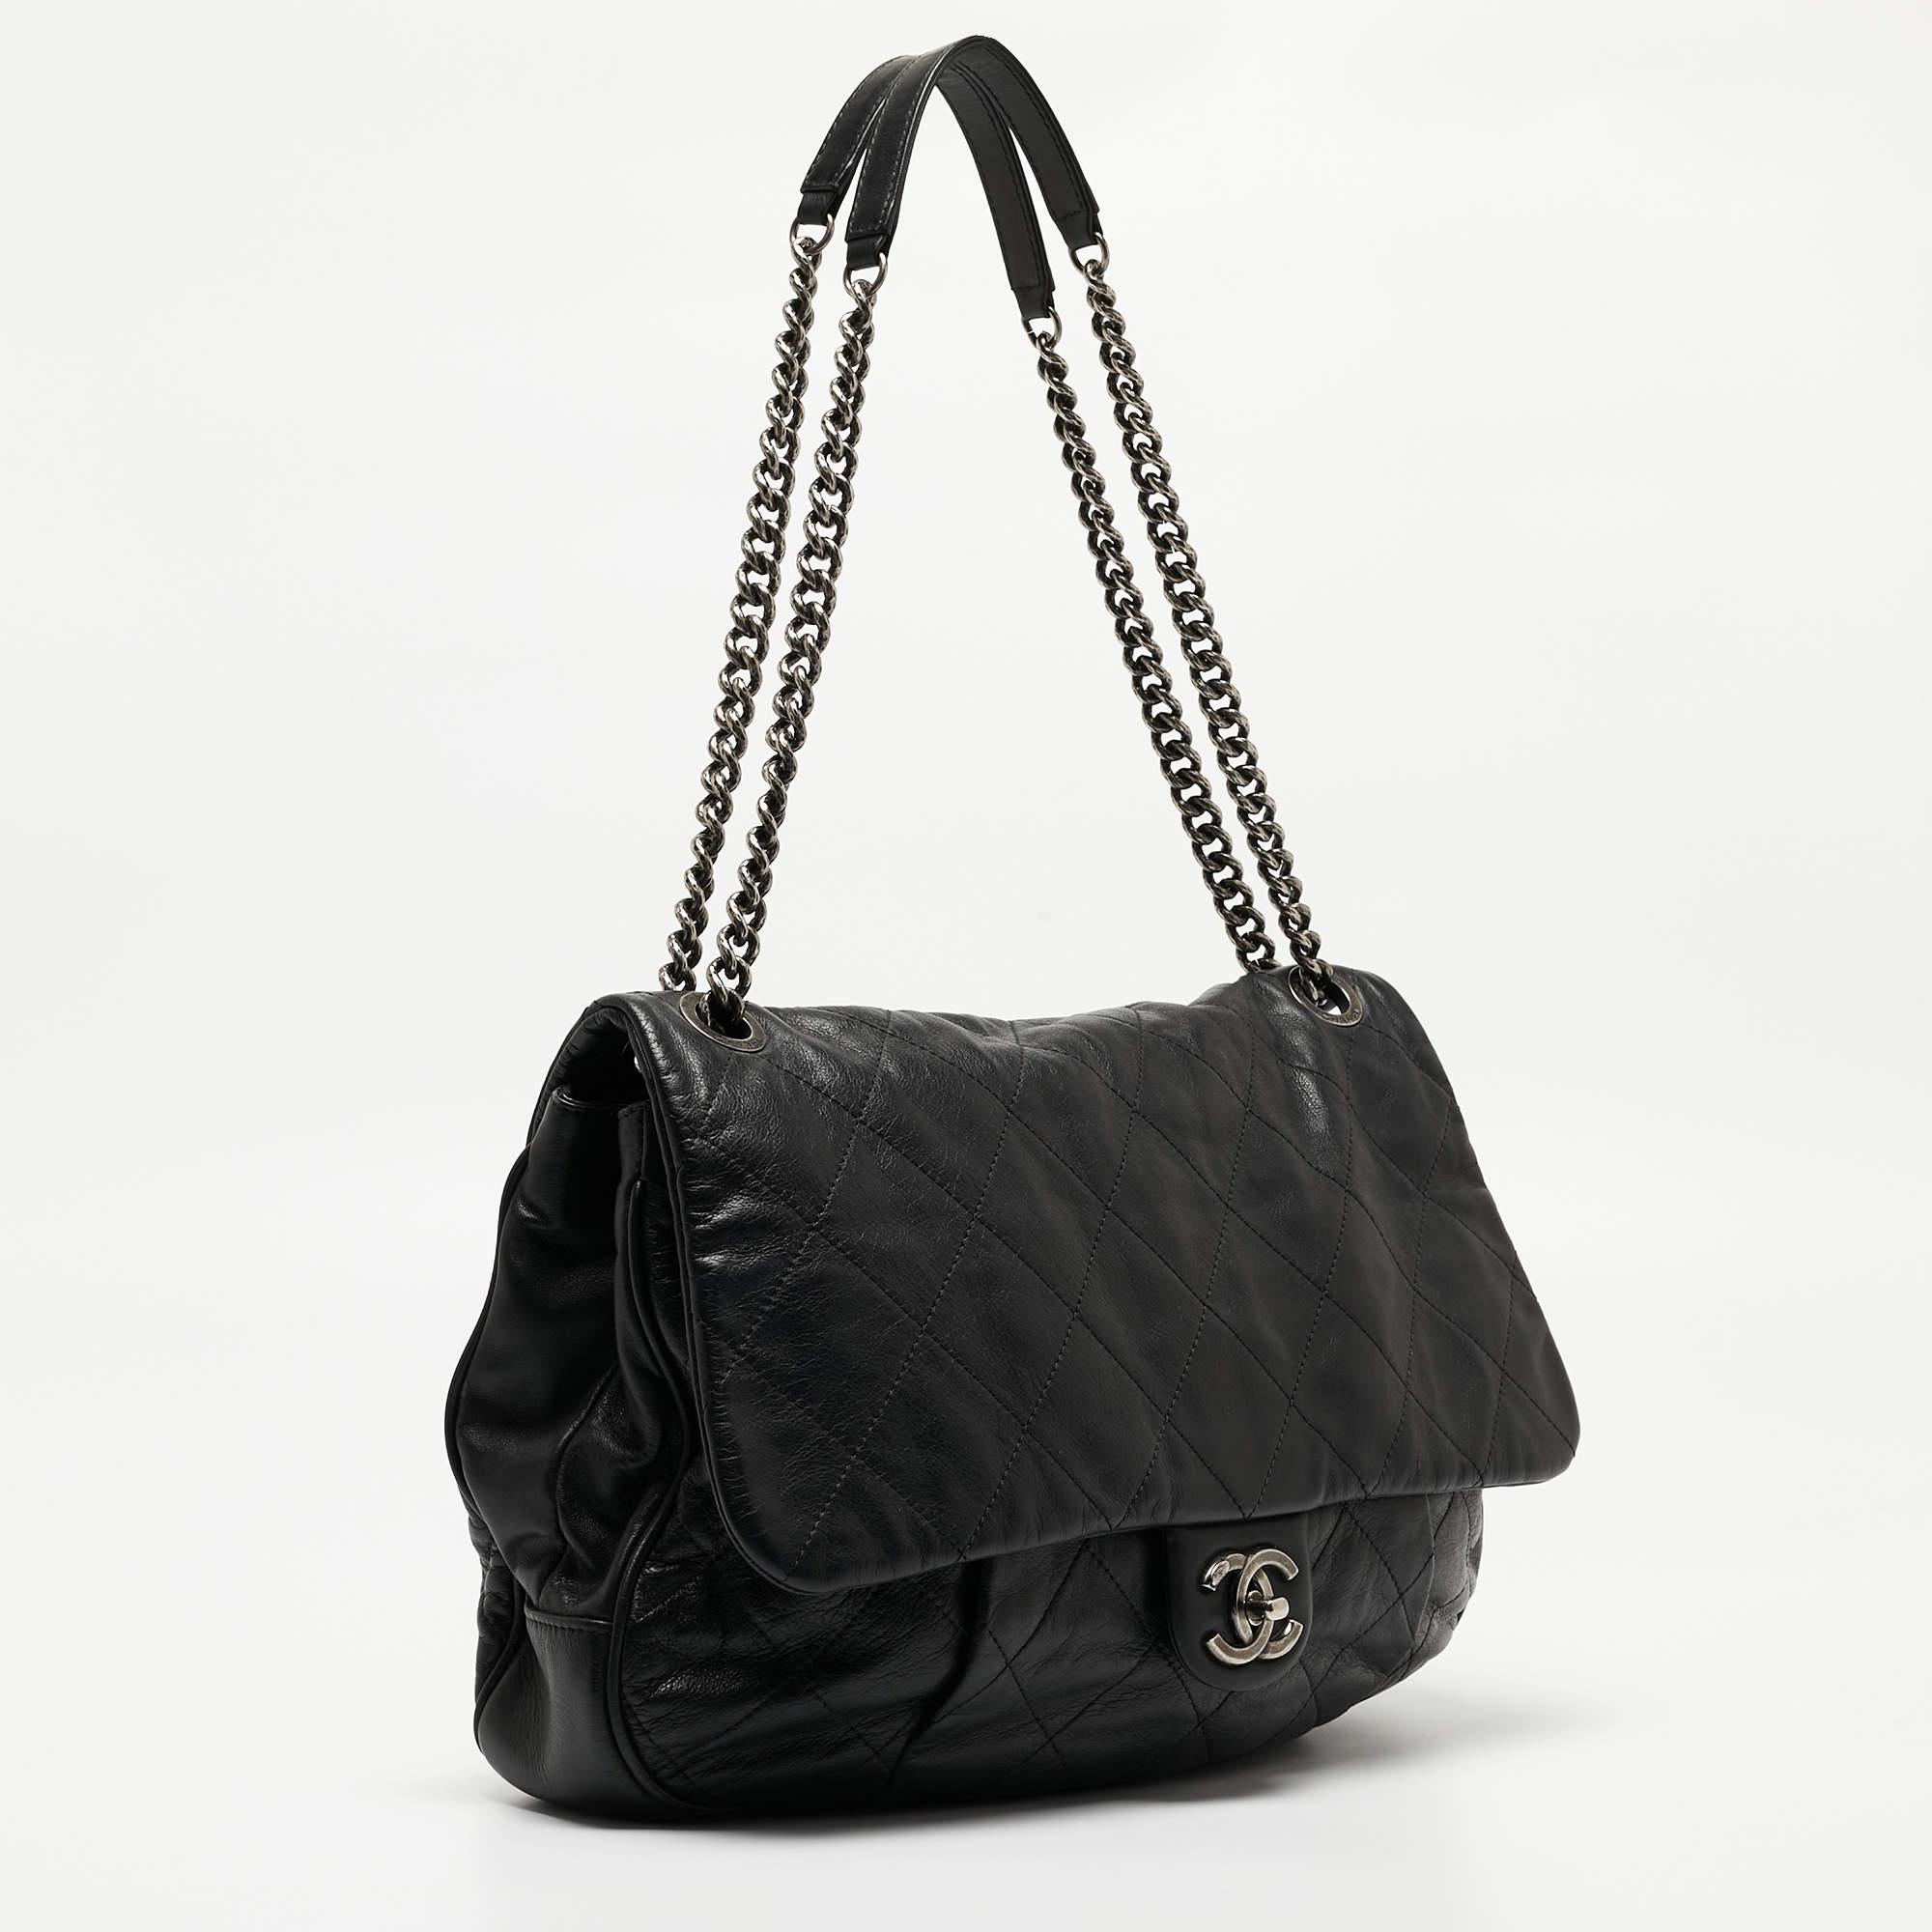 Chanel Black Quilted Leather Coco Pleats Flap Bag In Good Condition For Sale In Dubai, Al Qouz 2